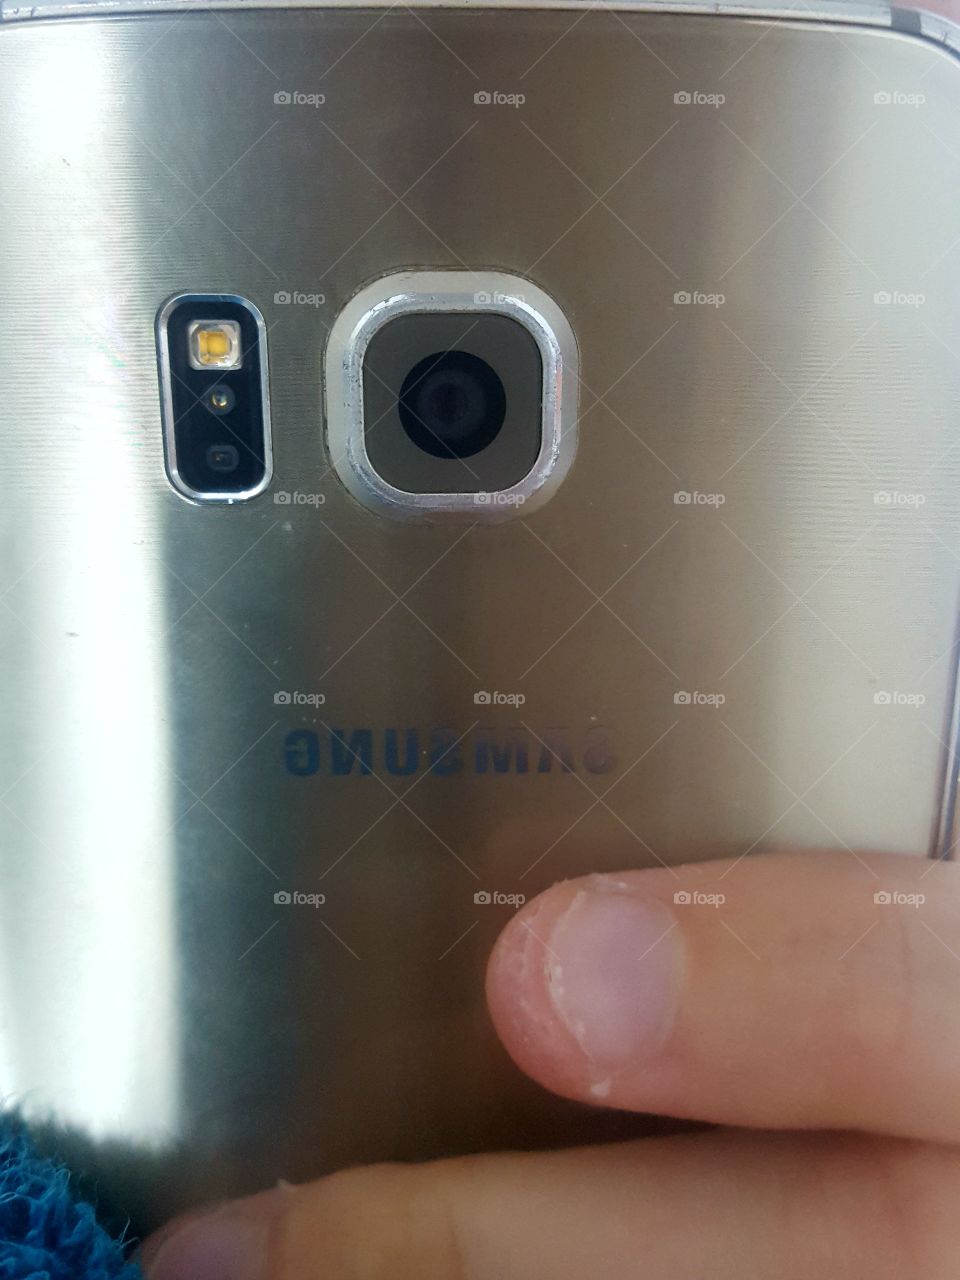 s6 edge taking a picture of it's self